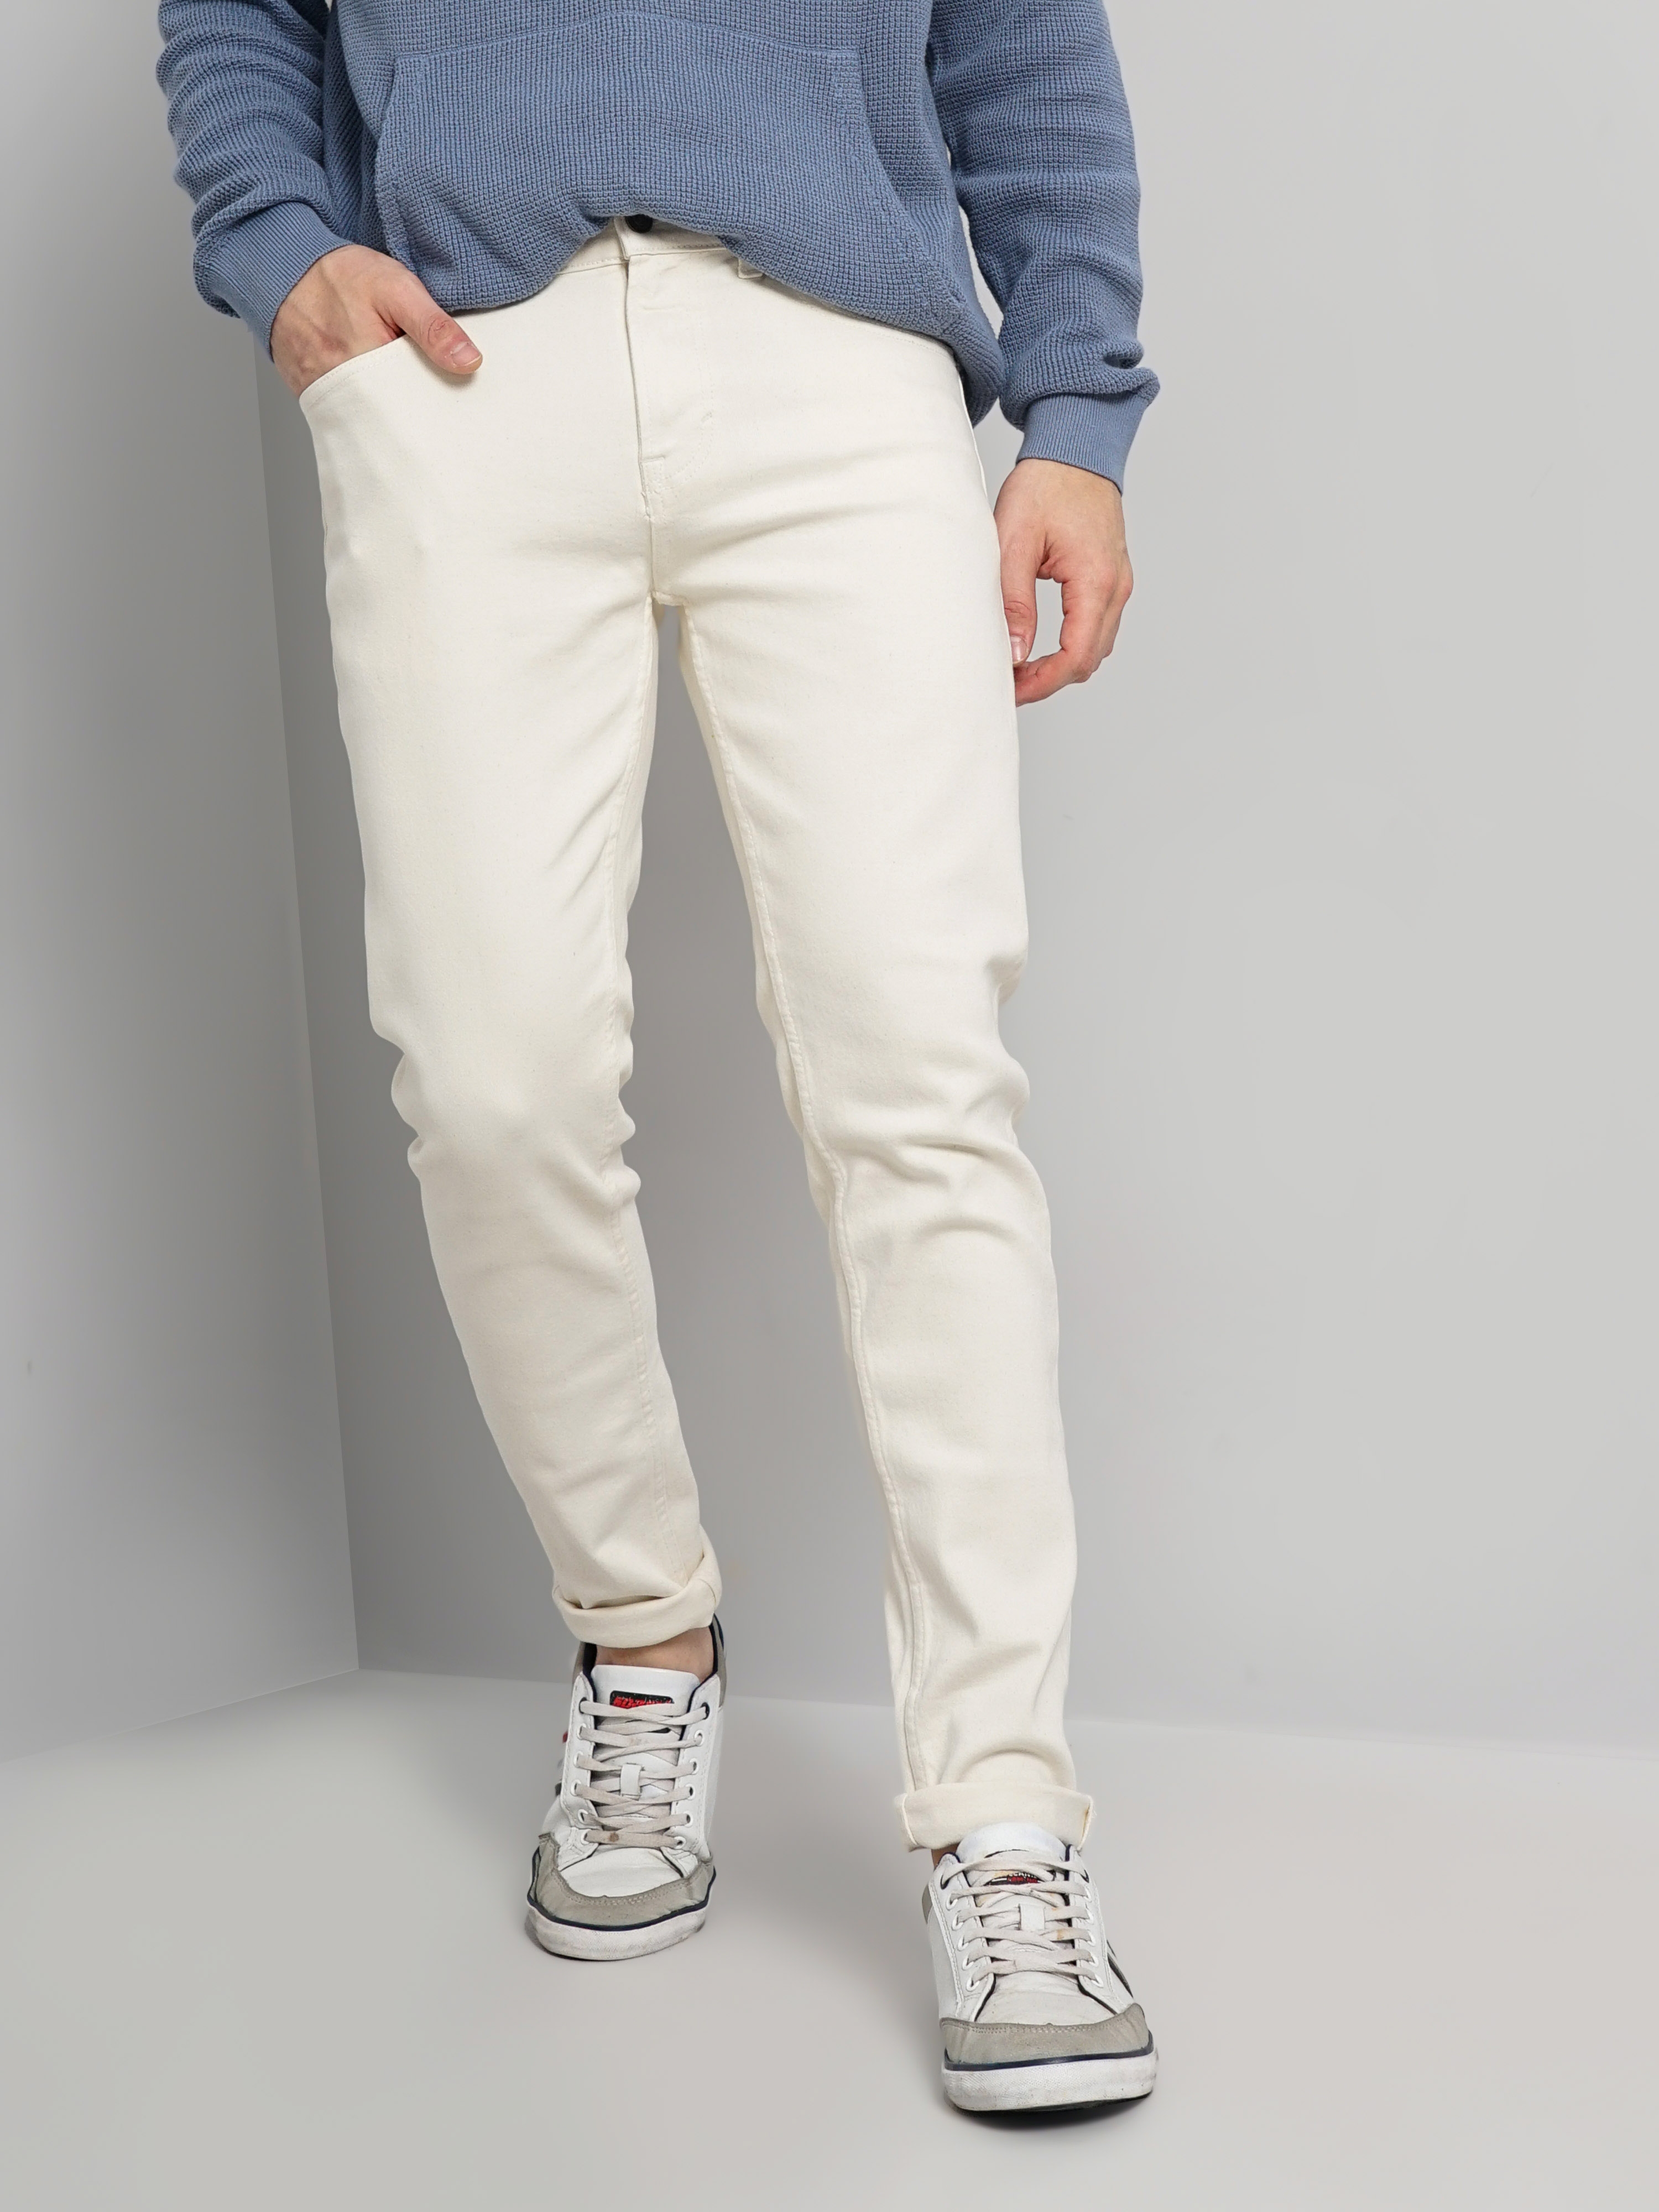 Slim Fit Stretchable White Jeans – NiftyJeans